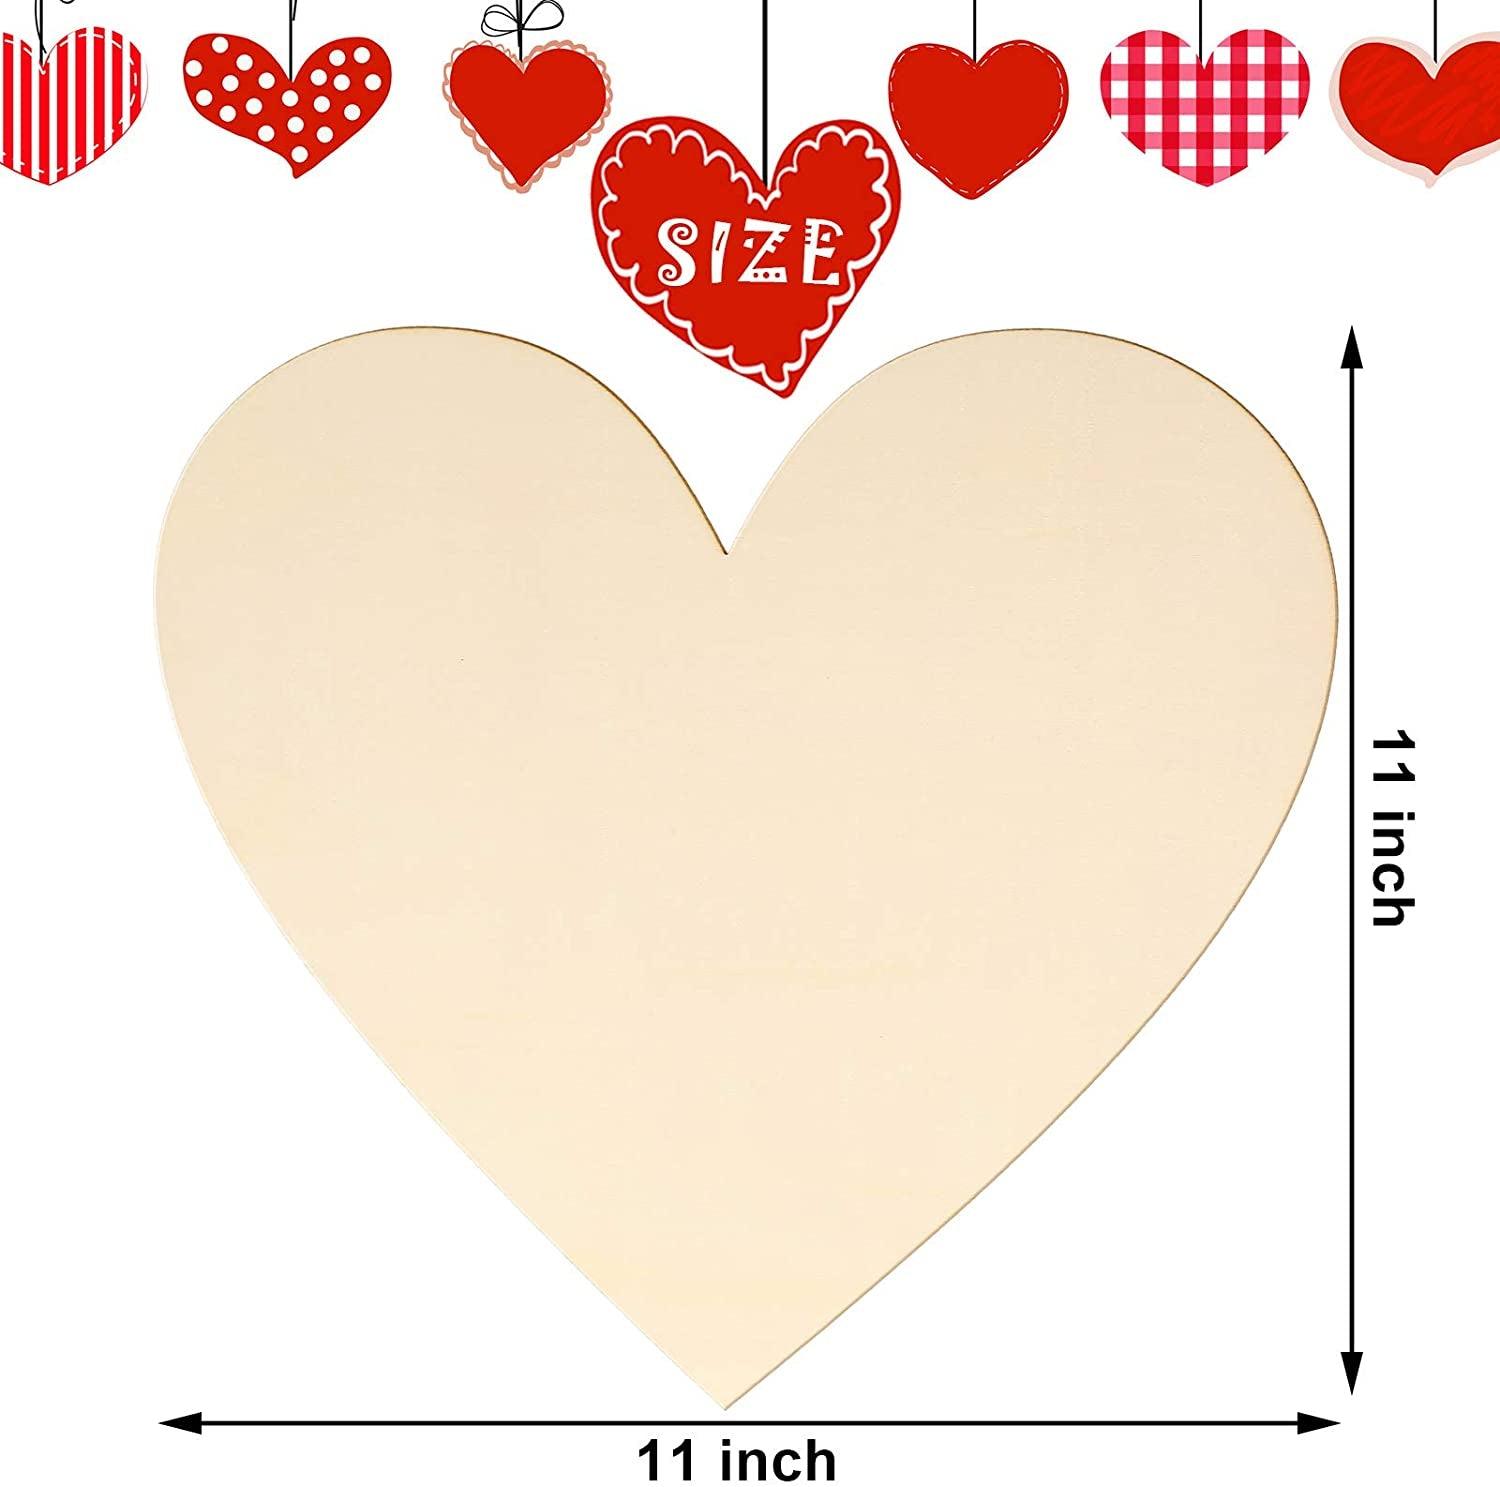 8 Pieces Wooden Hearts Cutouts Unfinished Blank Slice Valentine Hanging DIY Love Holiday 11 X 11 Inch - WoodArtSupply